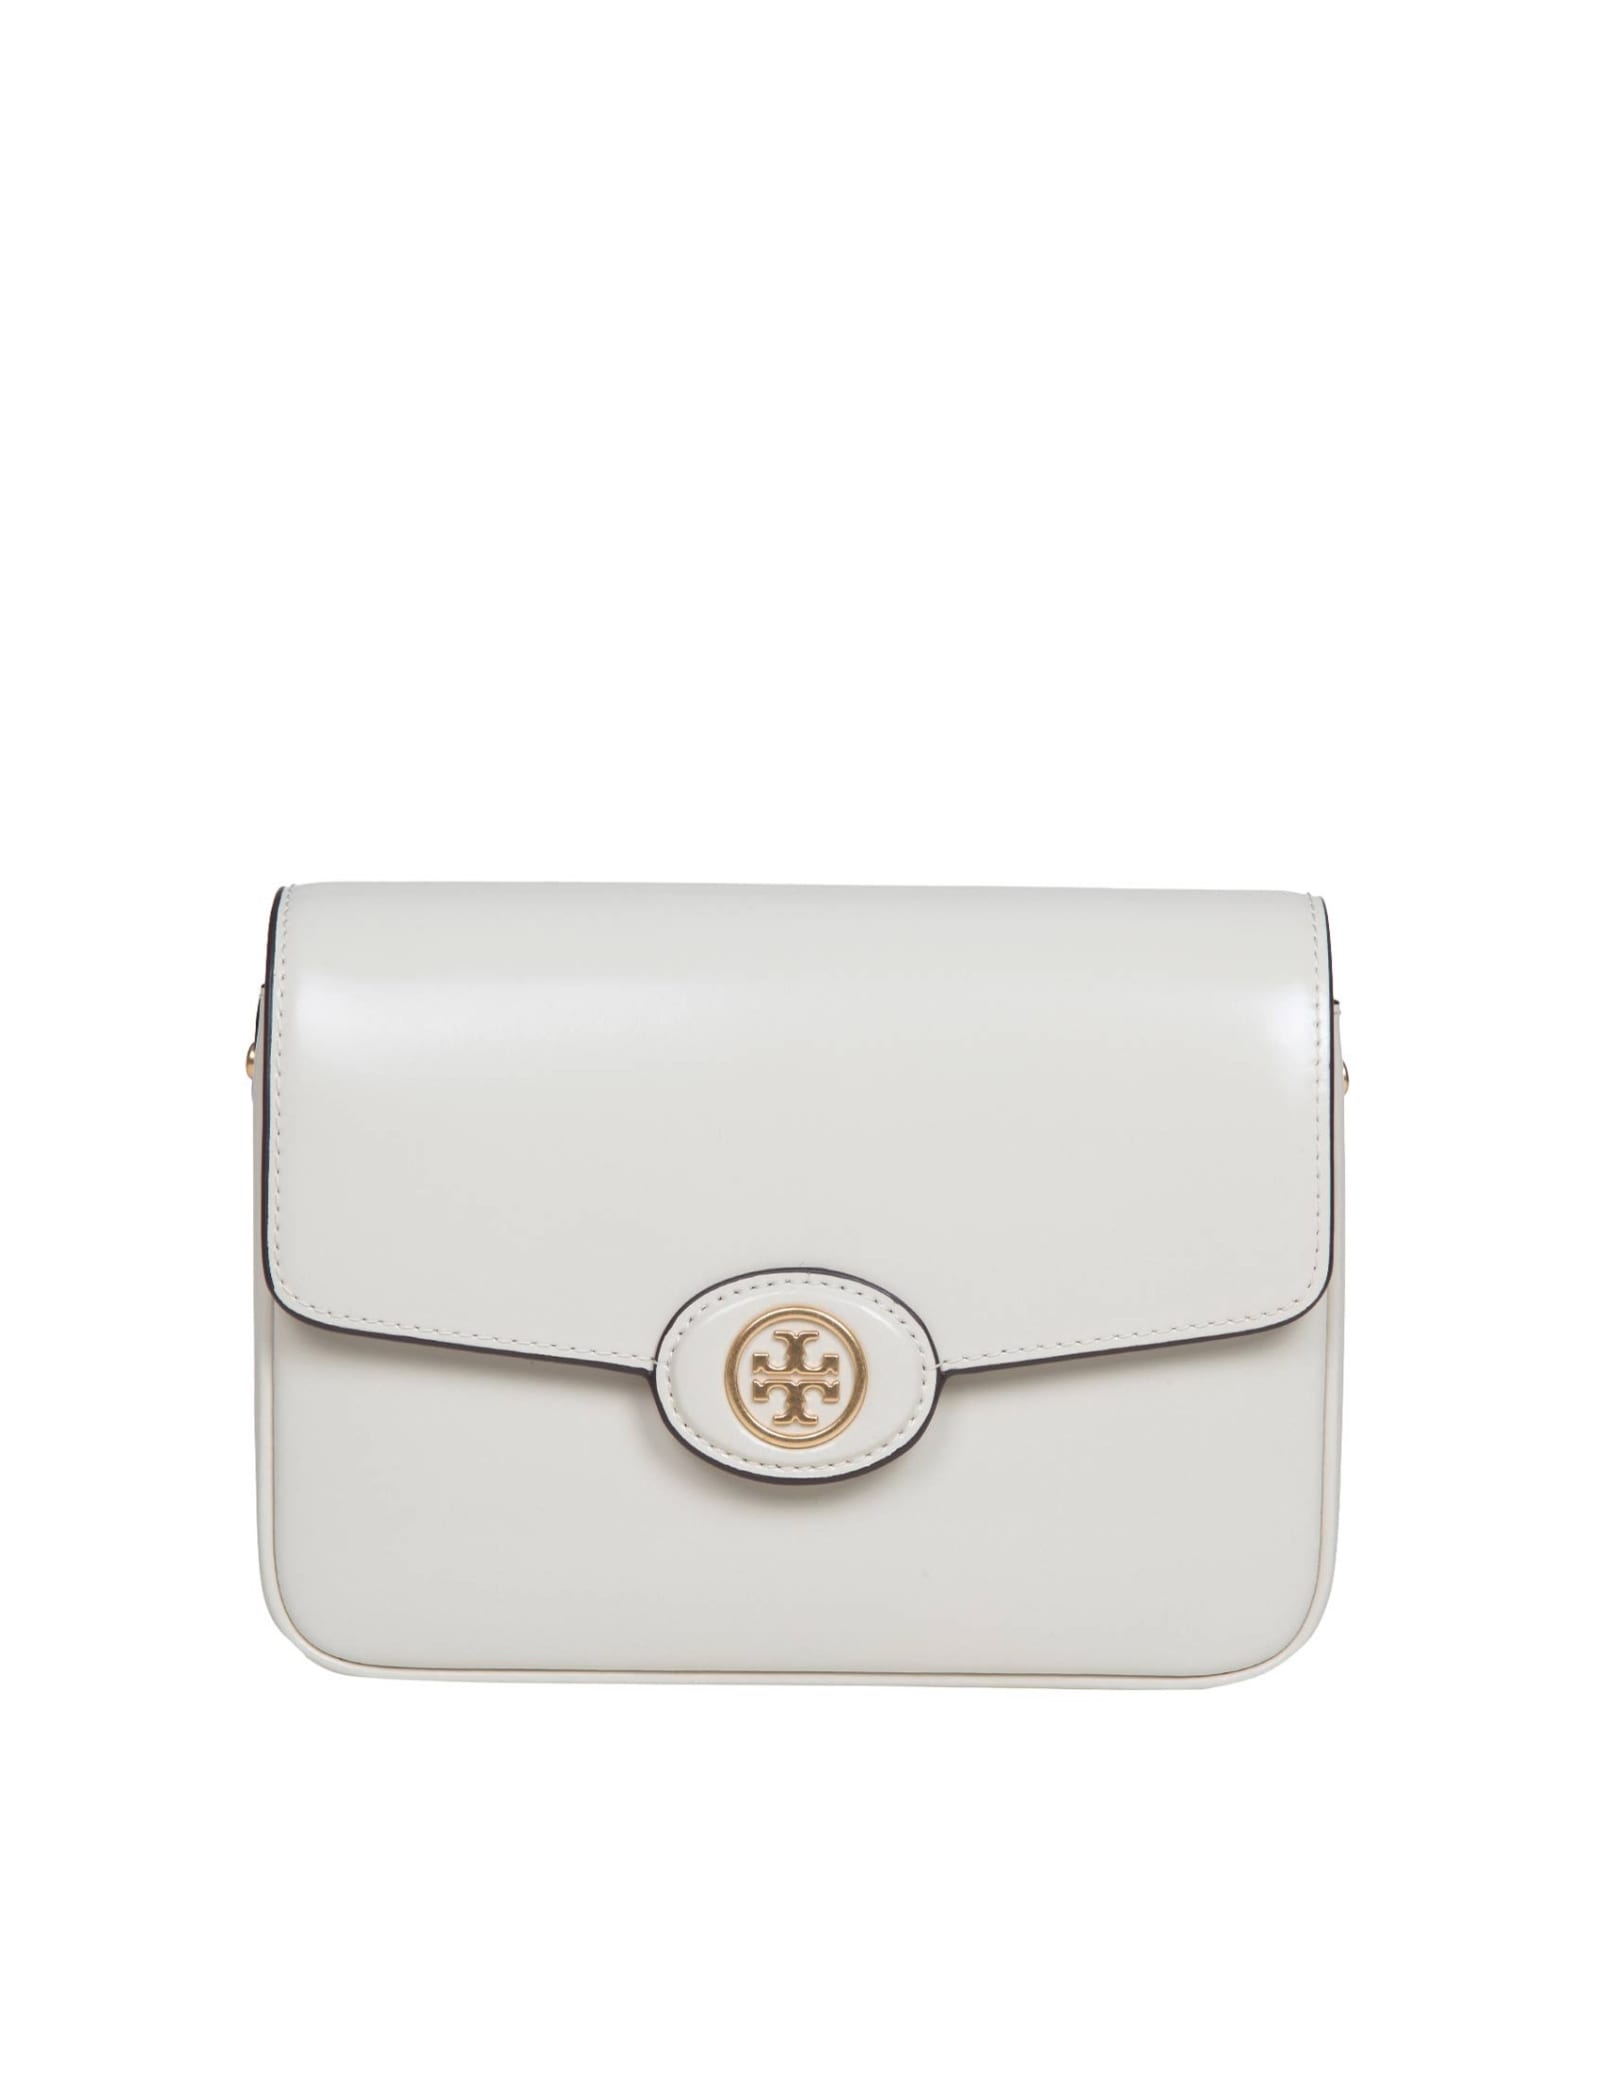 Tory Burch Robinson Bag In Brushed Leather Color Butter In Gray